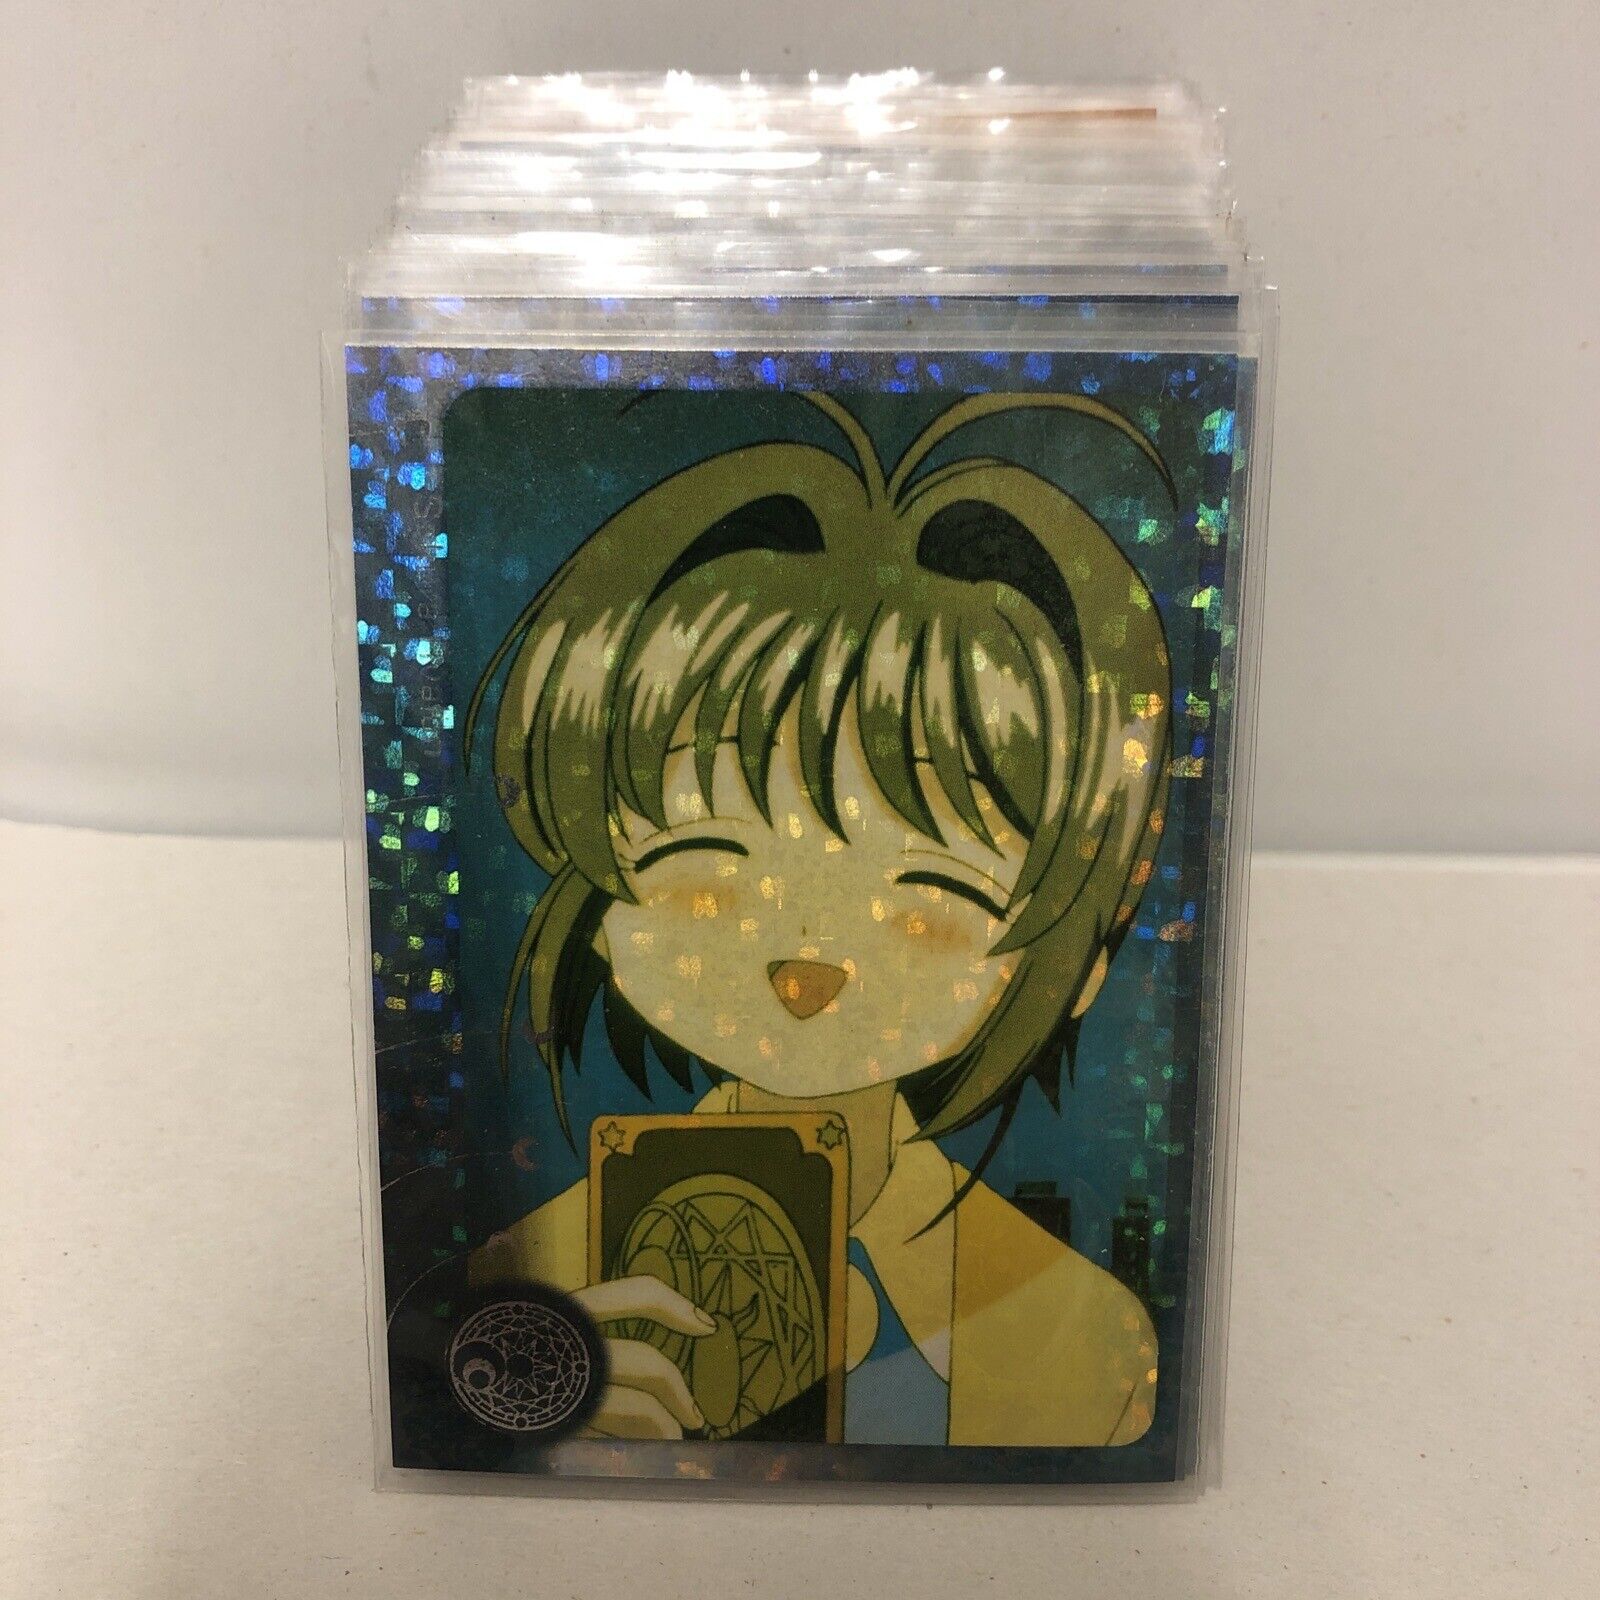 2000 UPPER DECK CARDCAPTORS PRISM CARD LOT OF 83 EXTREMELY RARE ONE PER PACK